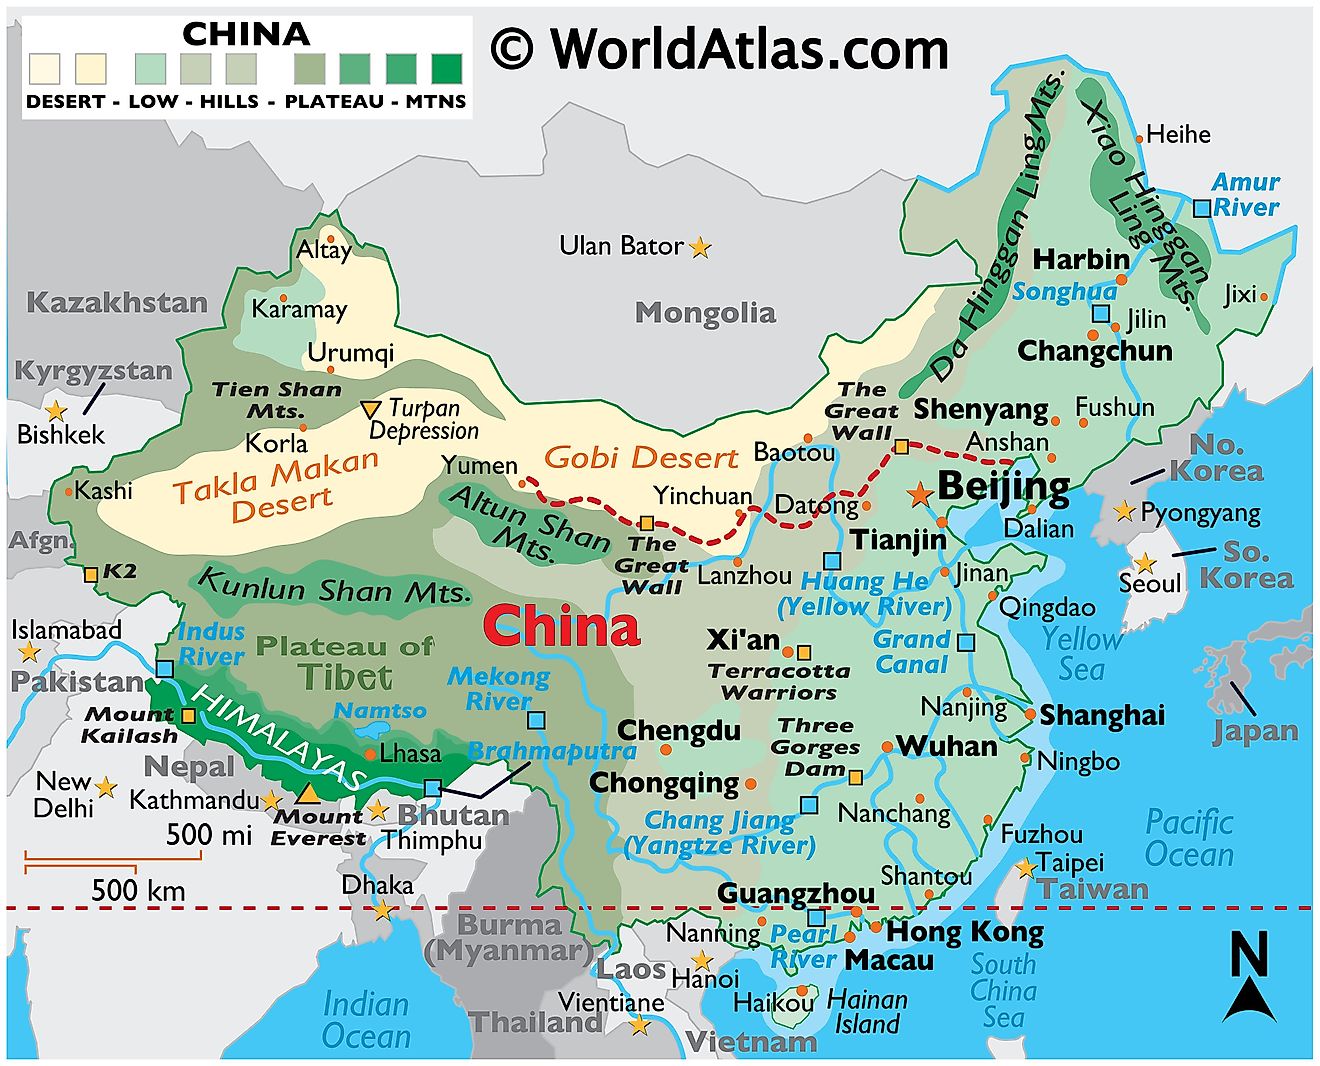 Physical Map of China showing the international borders, relief, mountain ranges, deserts like the Gobi and Takla Makan, important cities, islands, etc.